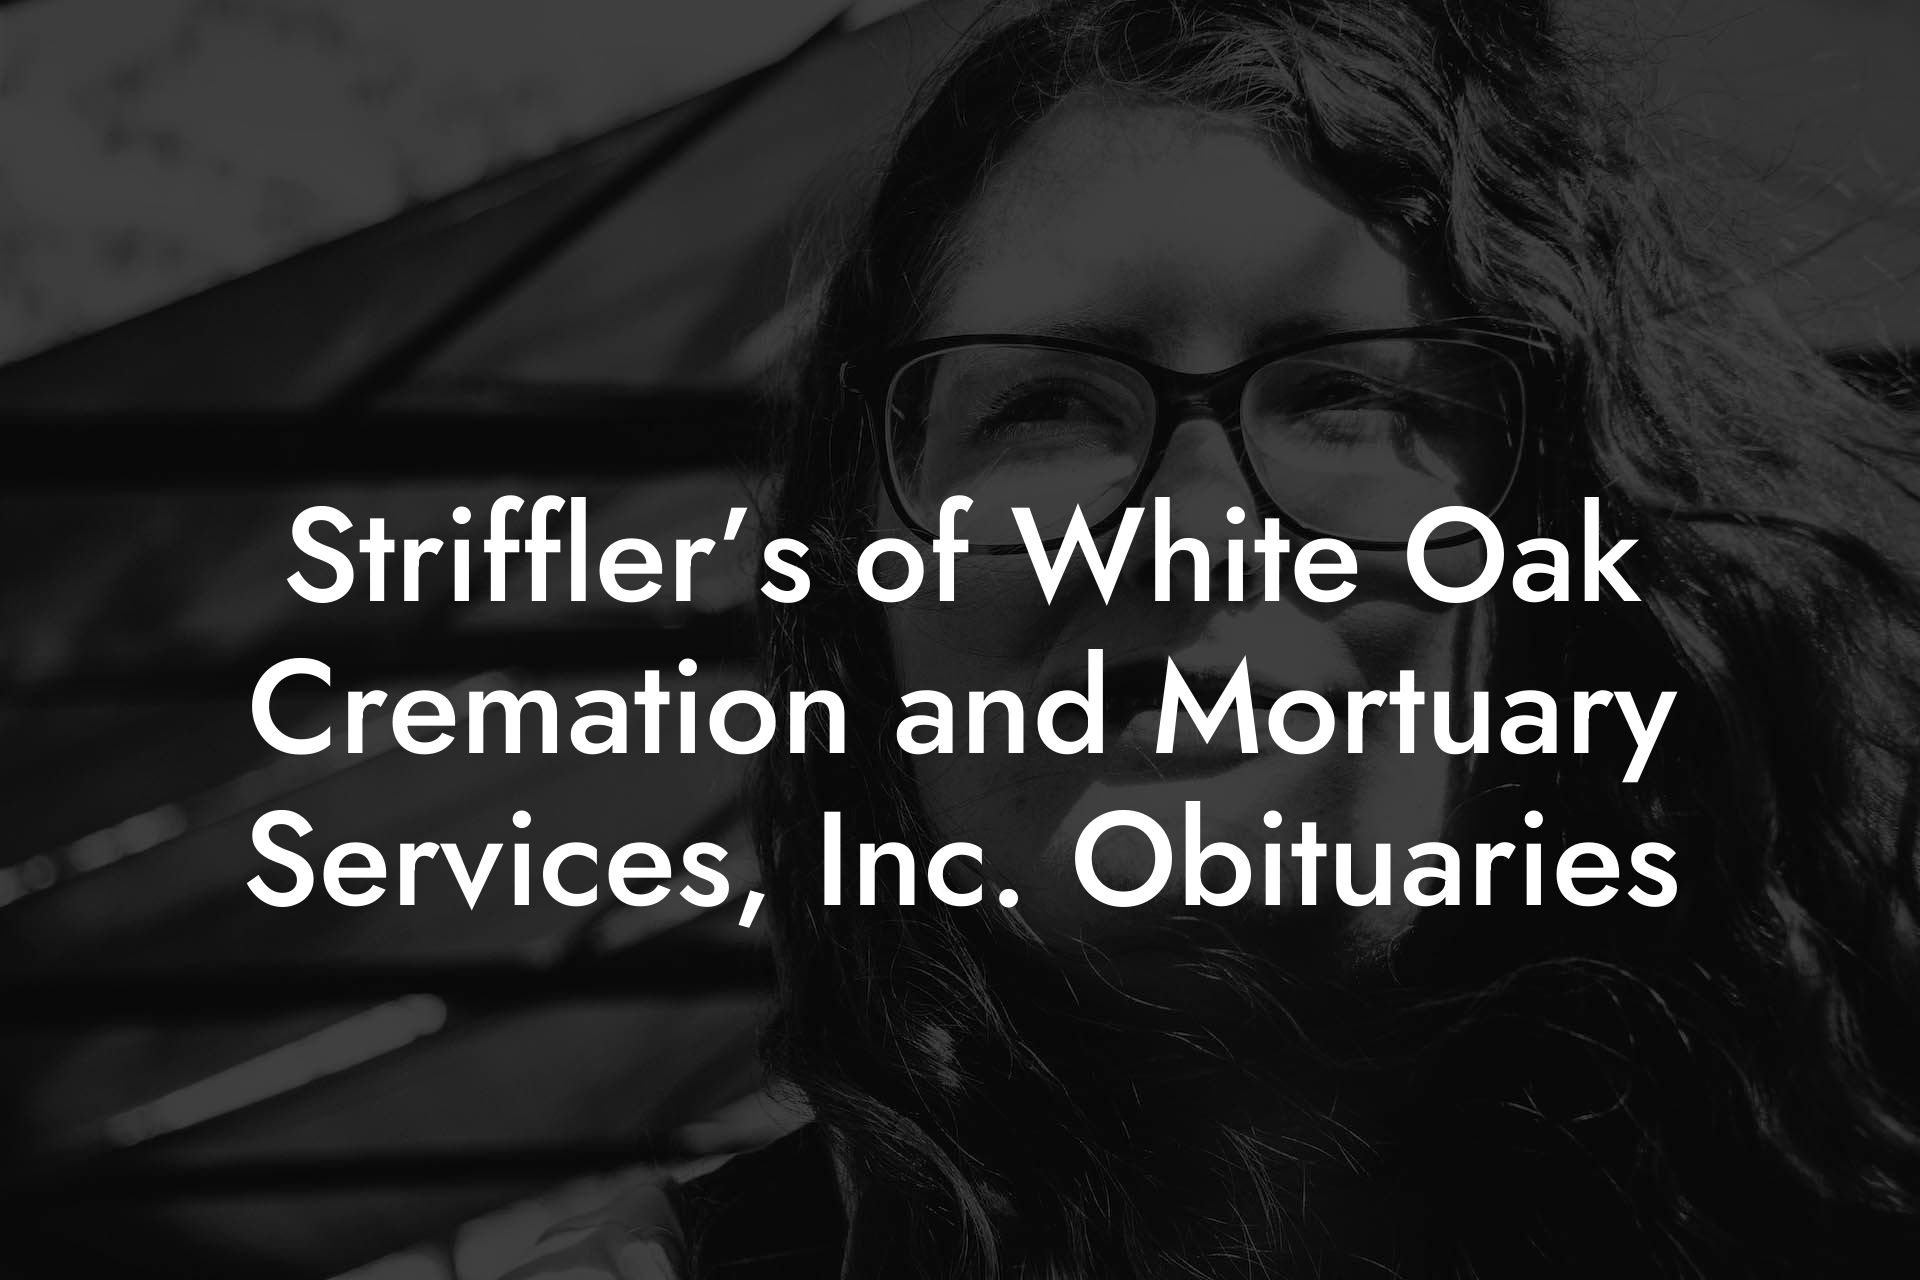 Striffler’s of White Oak Cremation and Mortuary Services, Inc. Obituaries